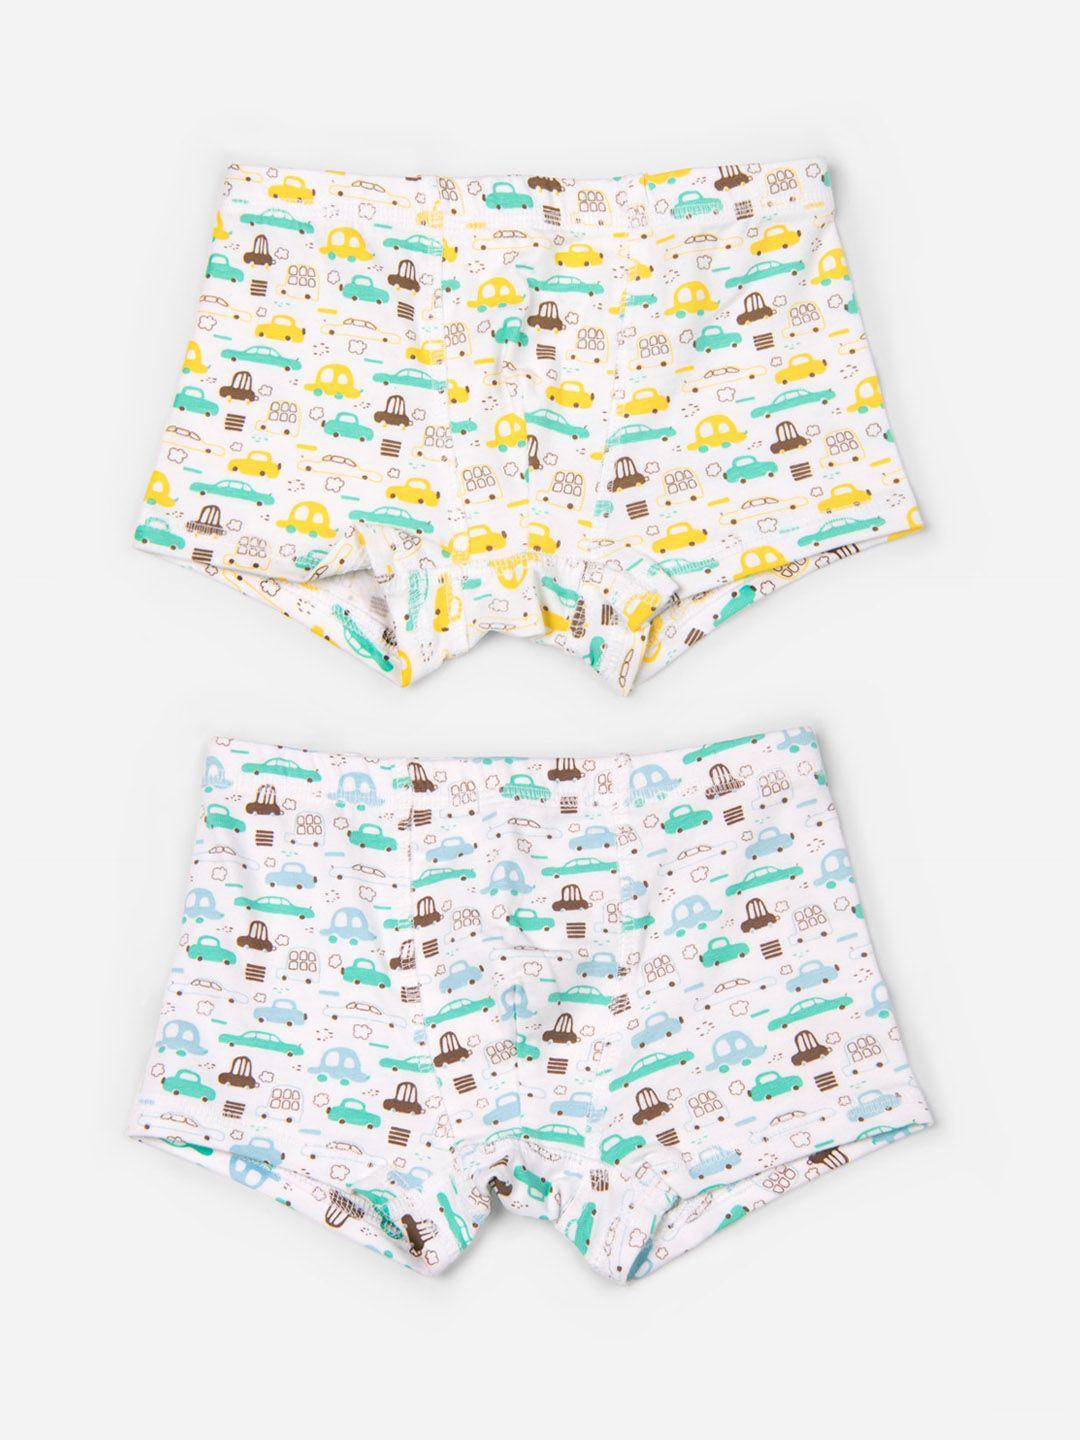 keebee boys pack of 2 printed organic cotton boxer-style briefs